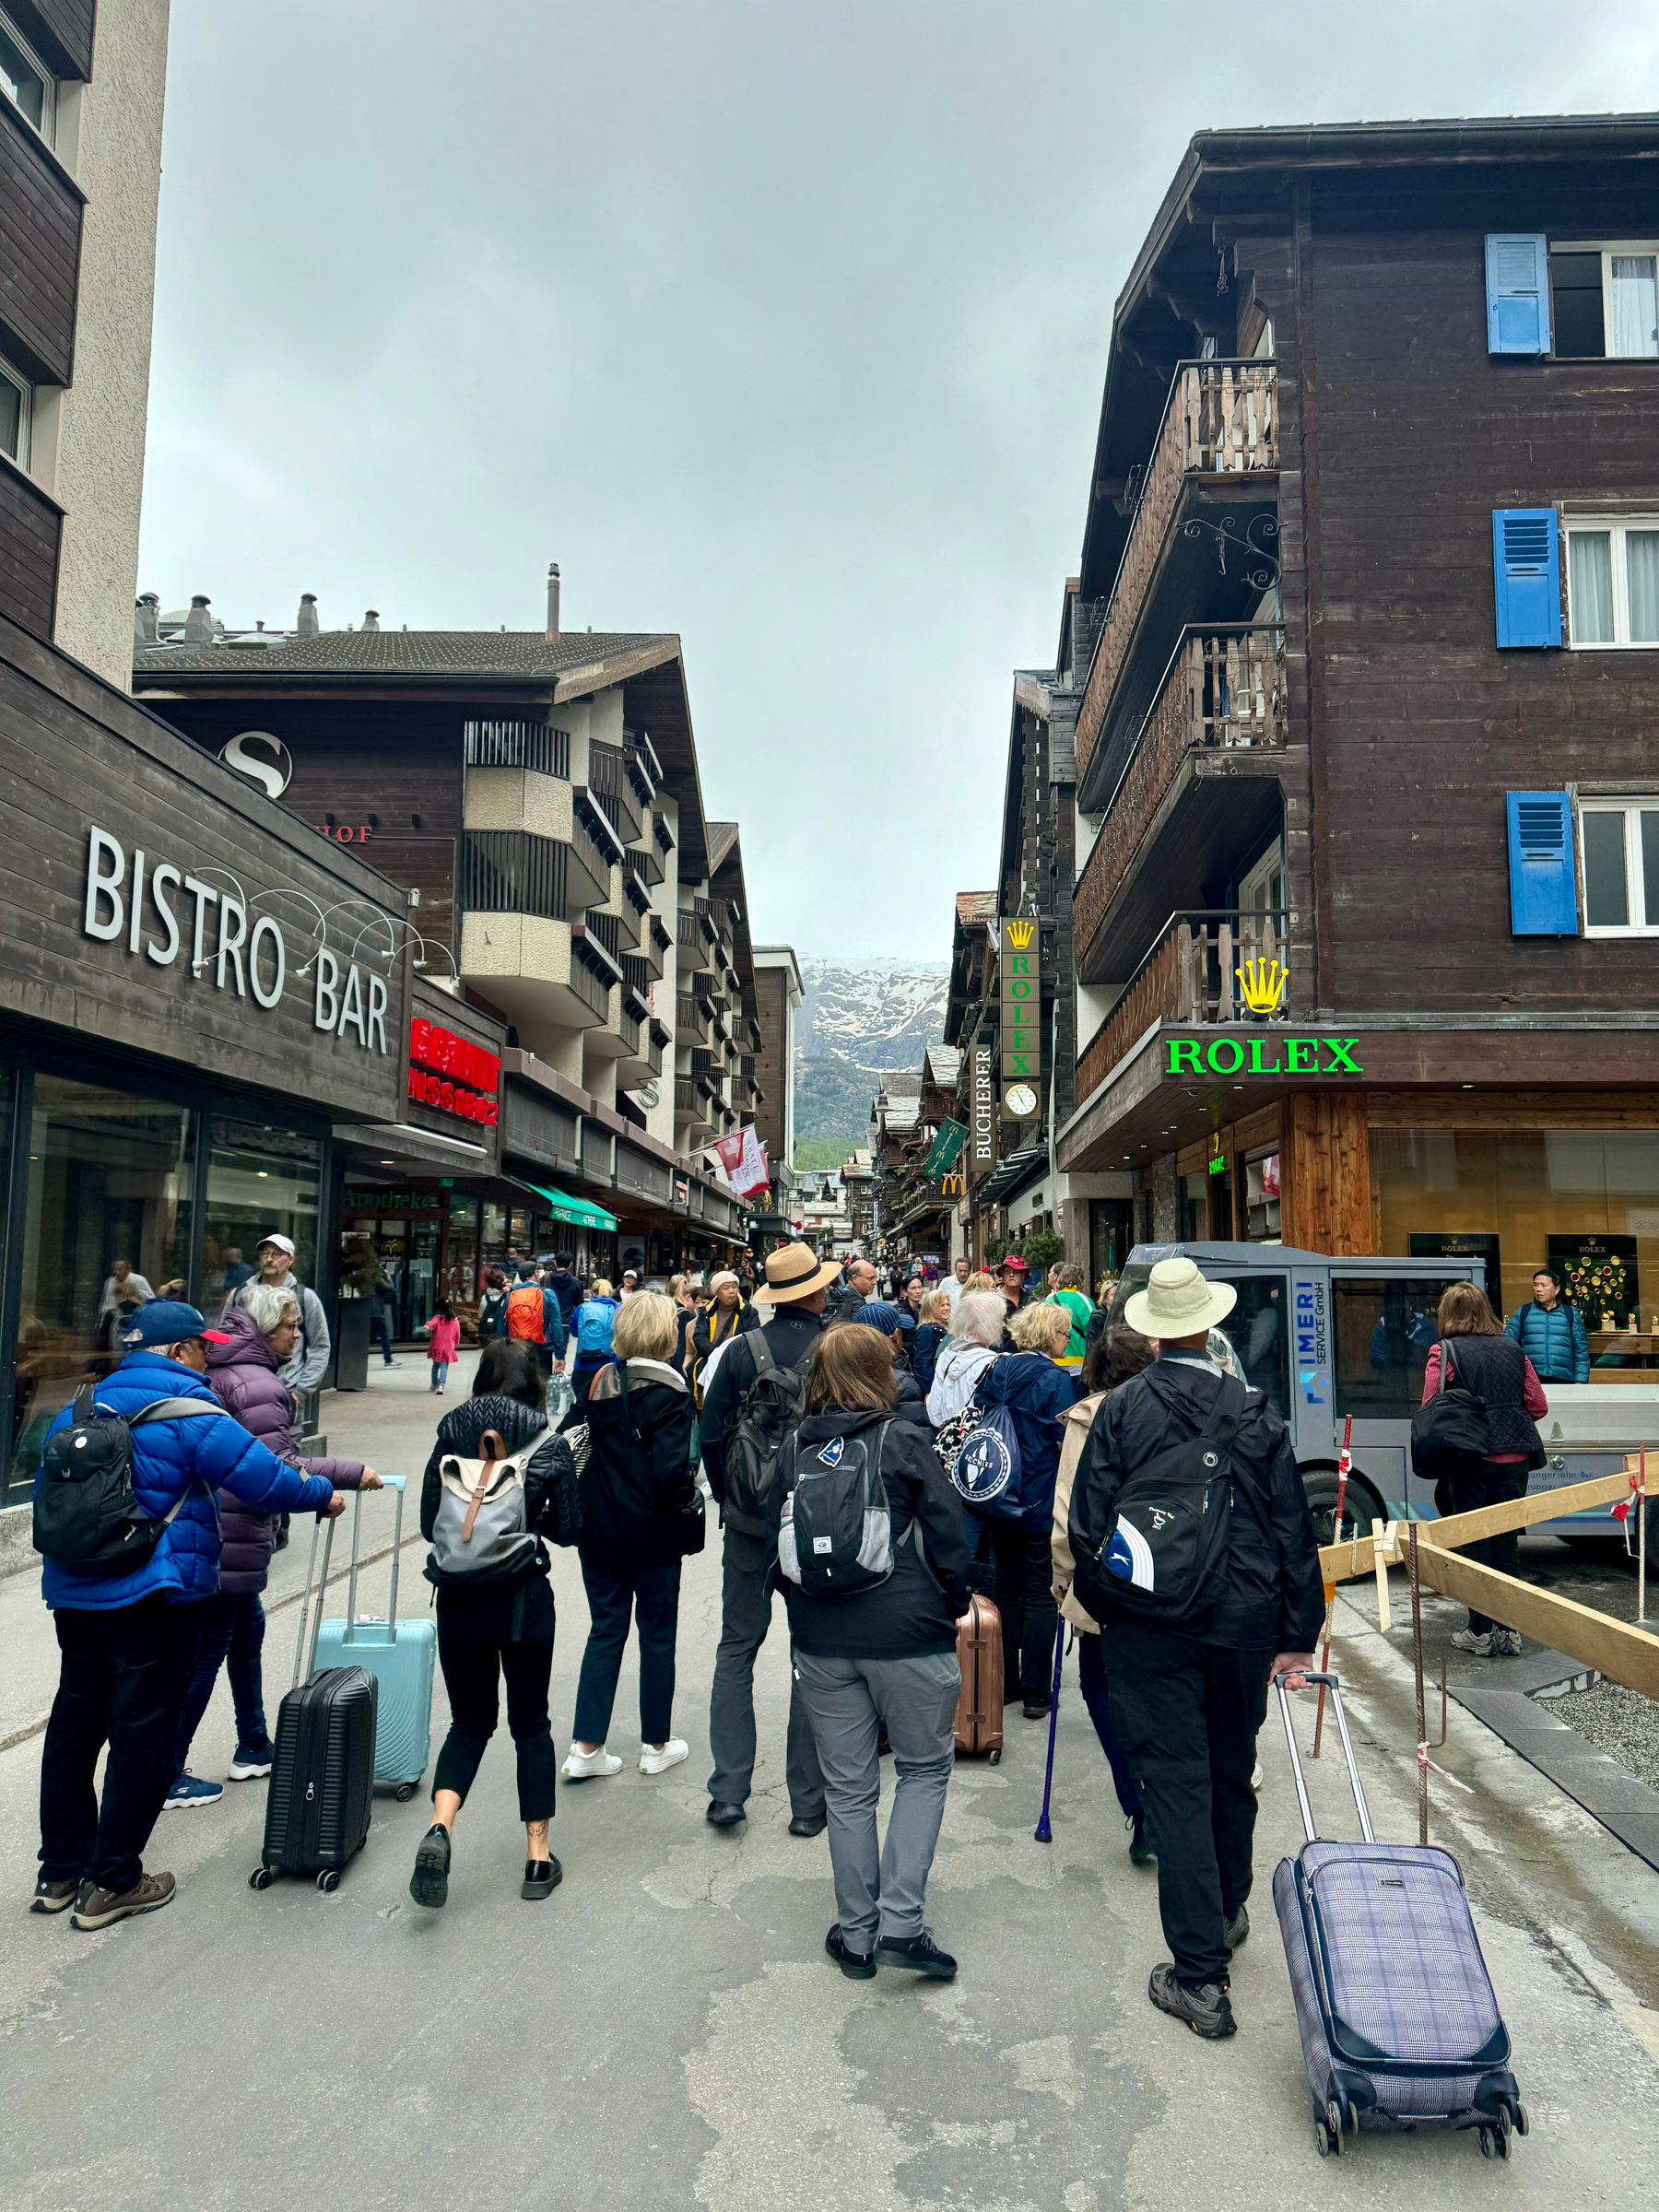 Tourists with luggage walking down a street lined with Swiss chalet-style buildings and shops, including a Rolex store, with mountains in the background.